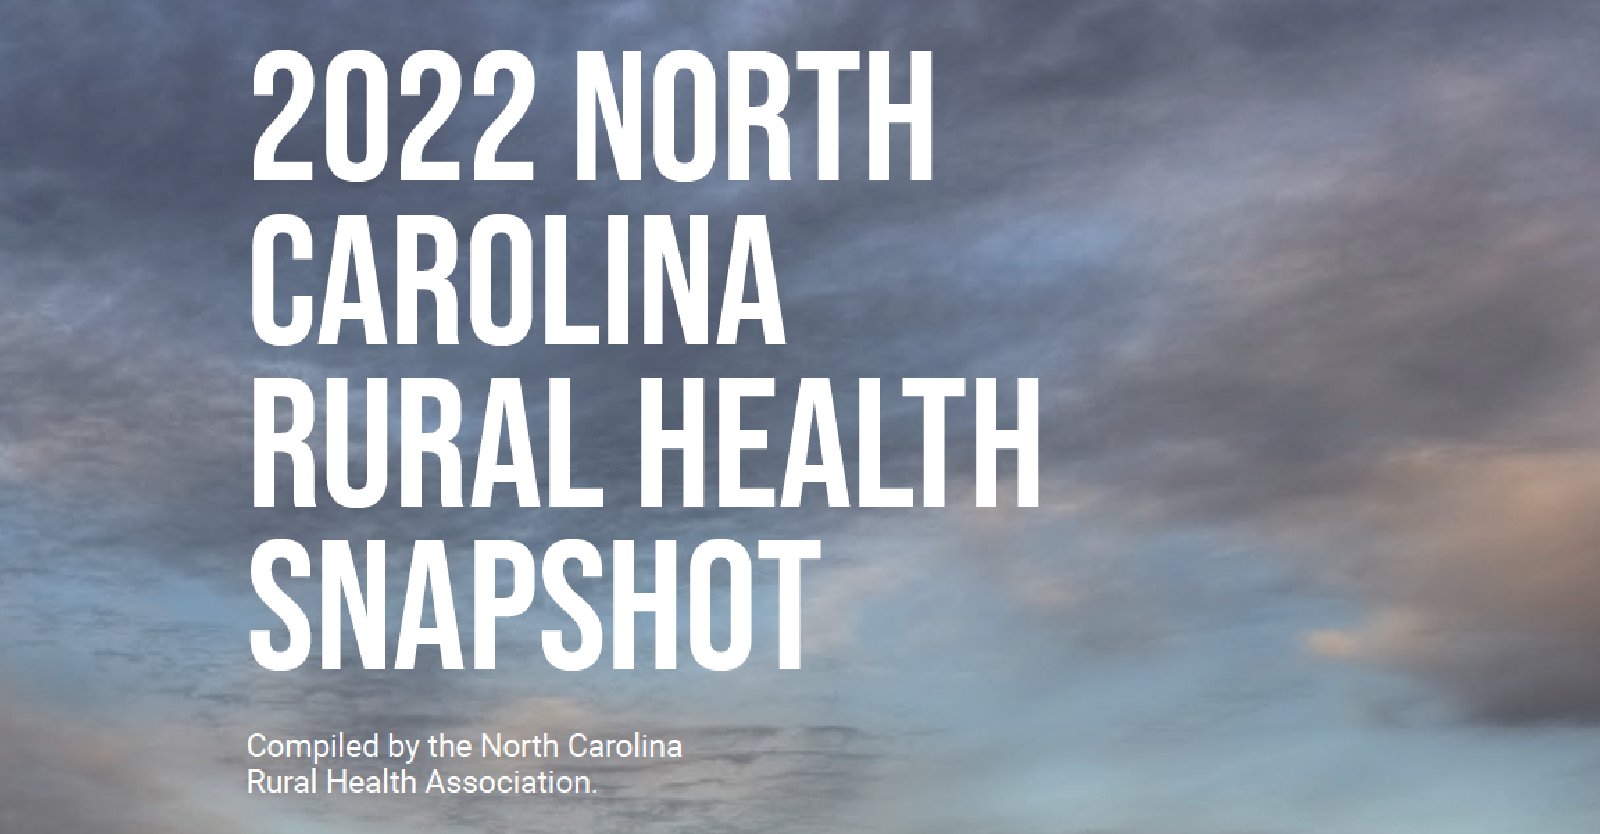 New Report Reveals Significant Challenges for North Carolina’s Rural Communities Image